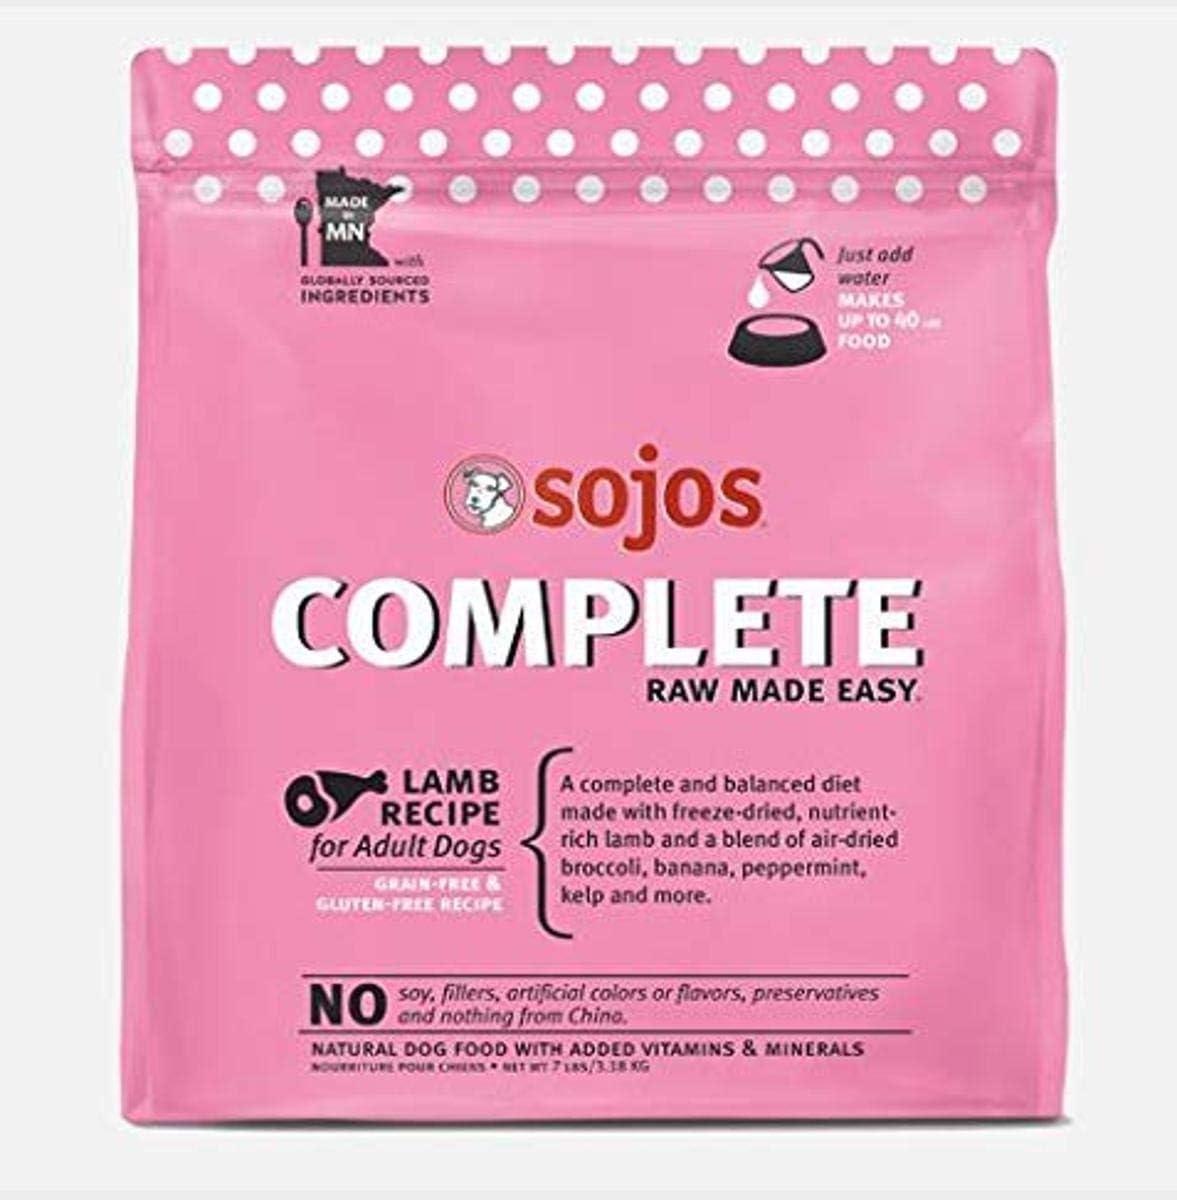 Sojos Complete Raw Made Easy Freeze-Dried, 7-Pound Bag Dog Food Lamb Recipe (1) : Pet Supplies